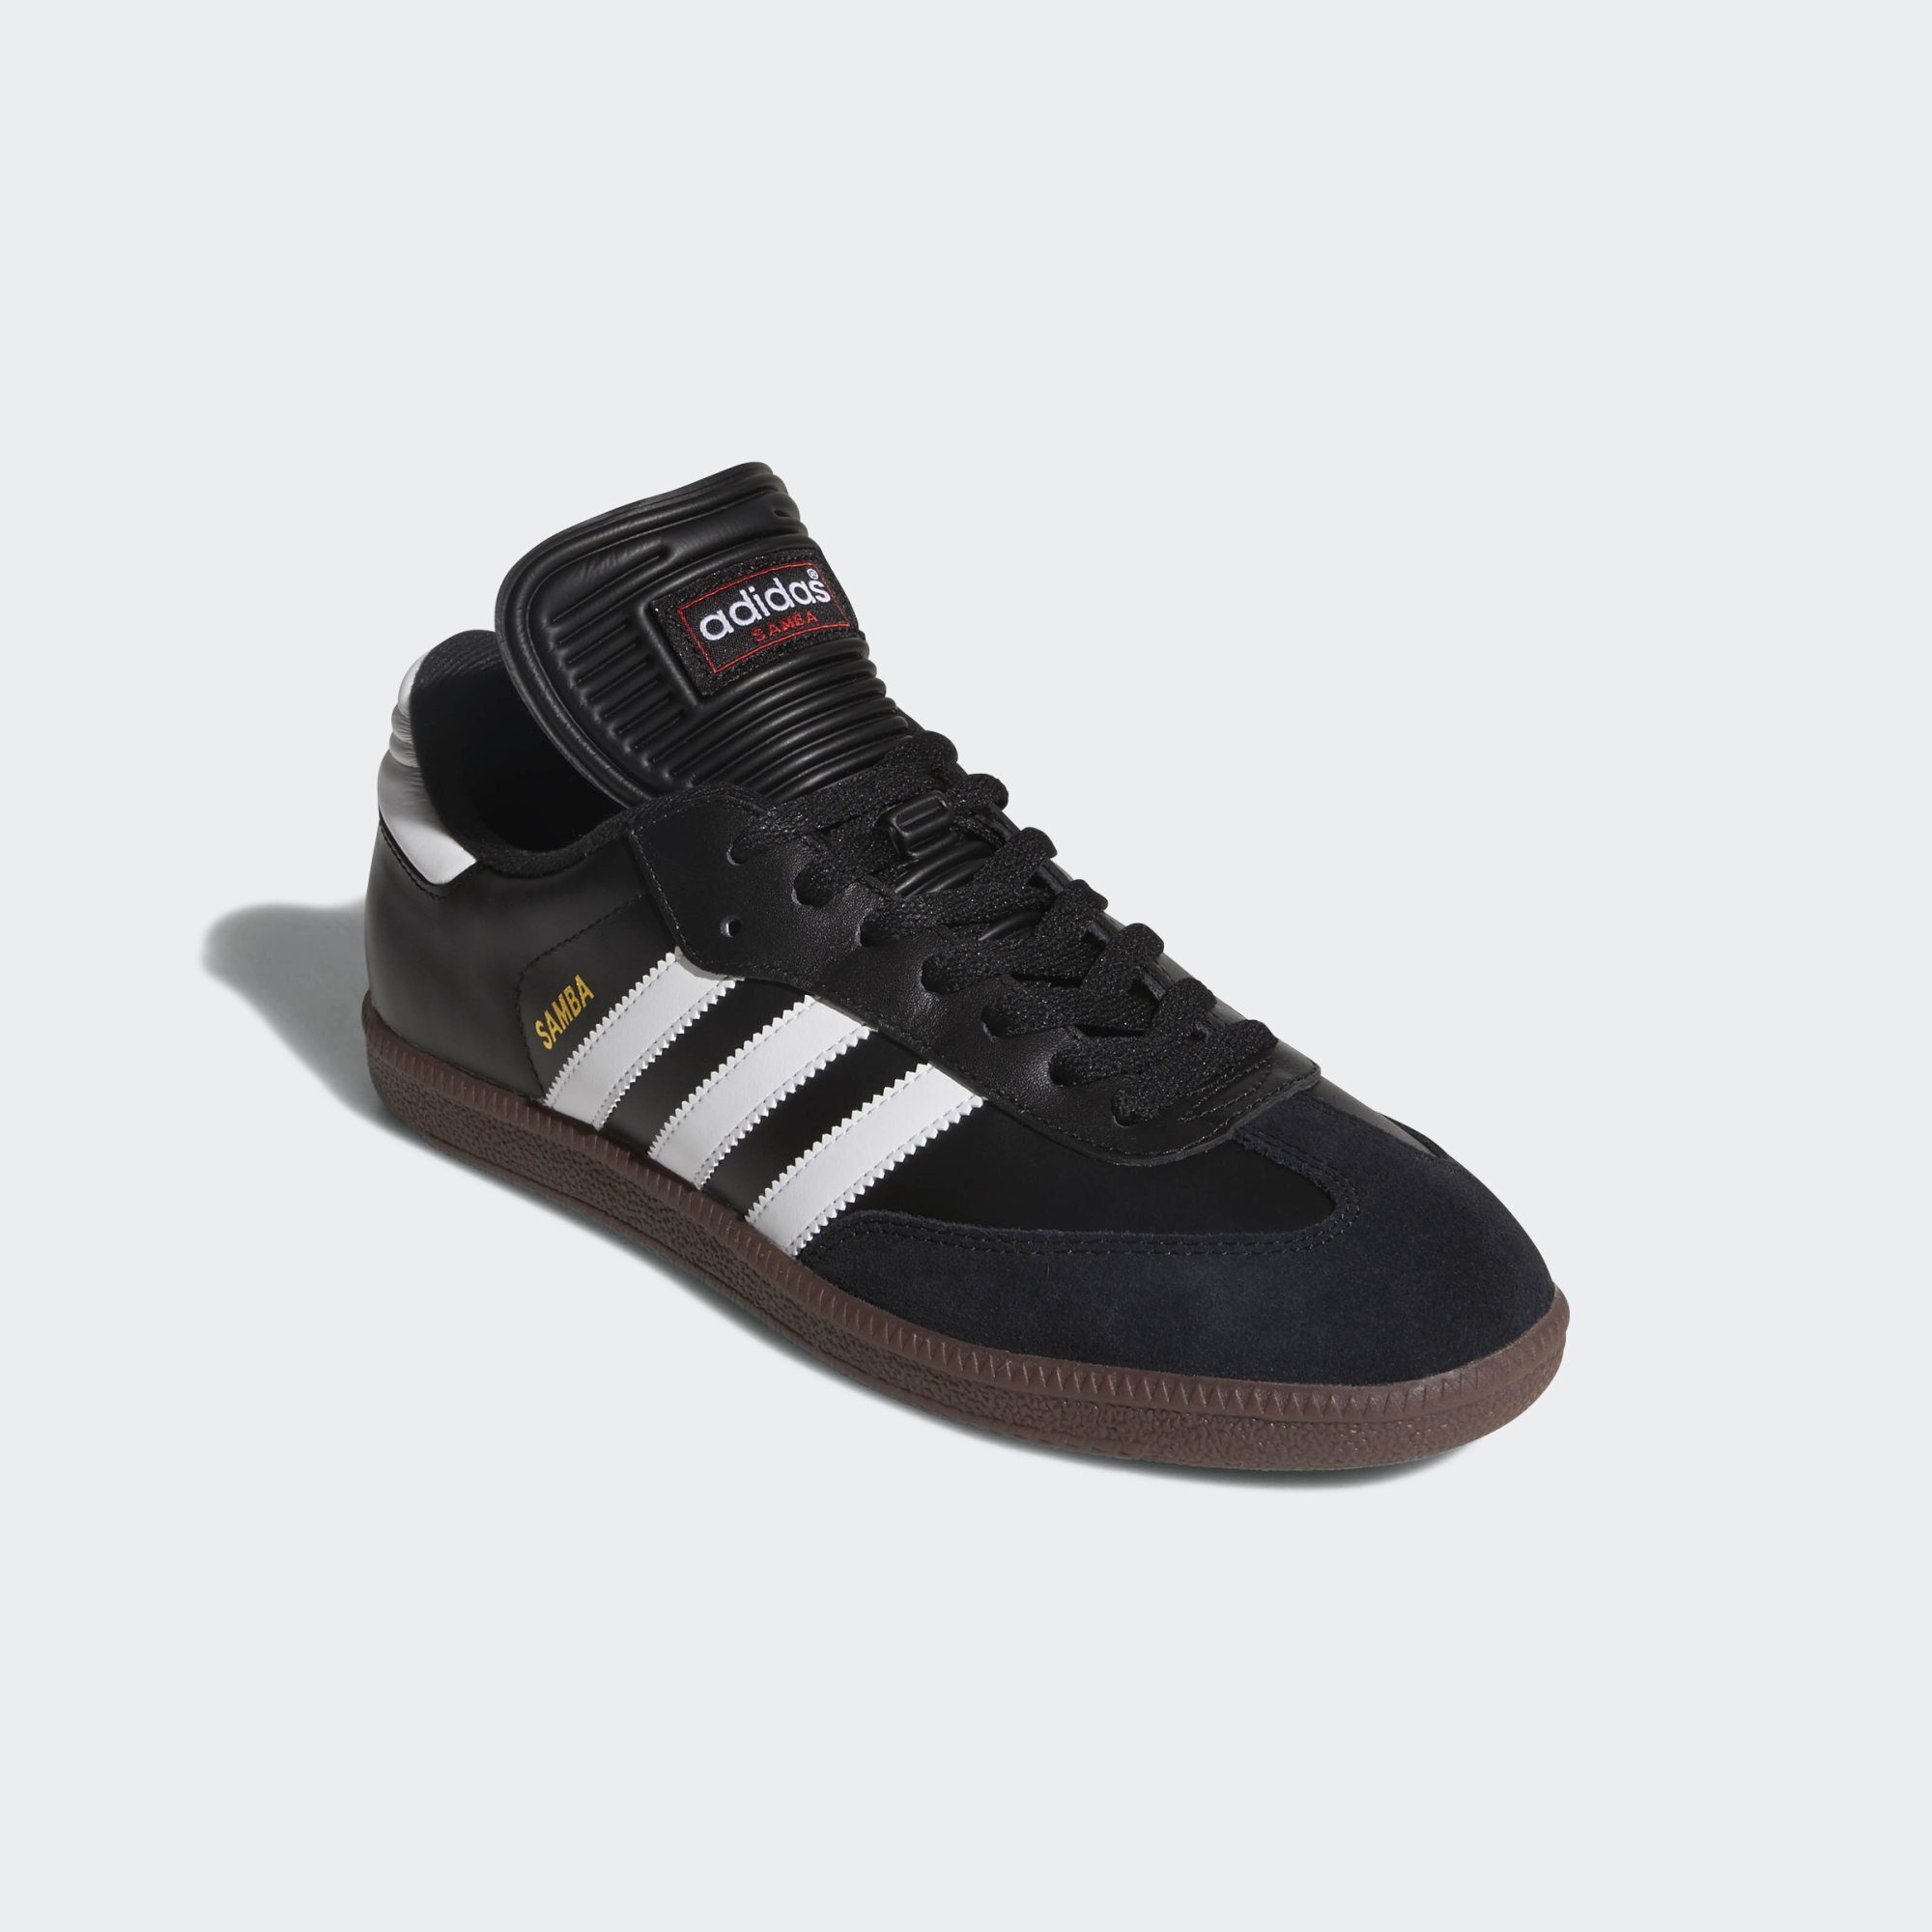 adidas Performance SAMBA CLASSIC BOOTS Fußballschuh, Main materials:  Leather upper / Textile and synthetic lining / Rubber outsole